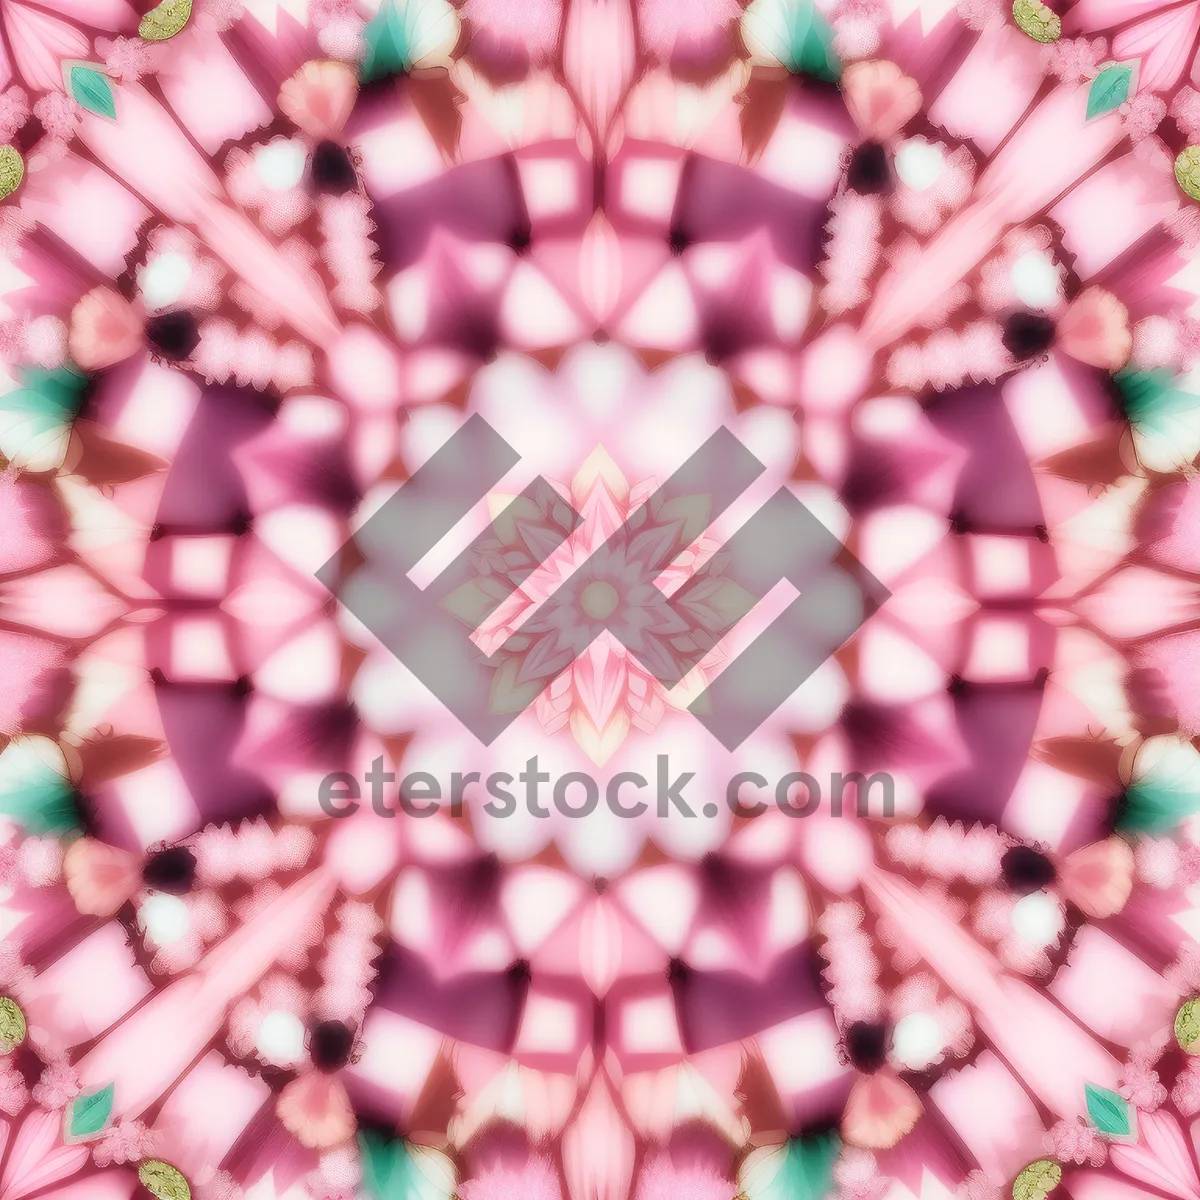 Picture of Colorful Candy Pattern: Vibrant Confectionery Wallpaper Design